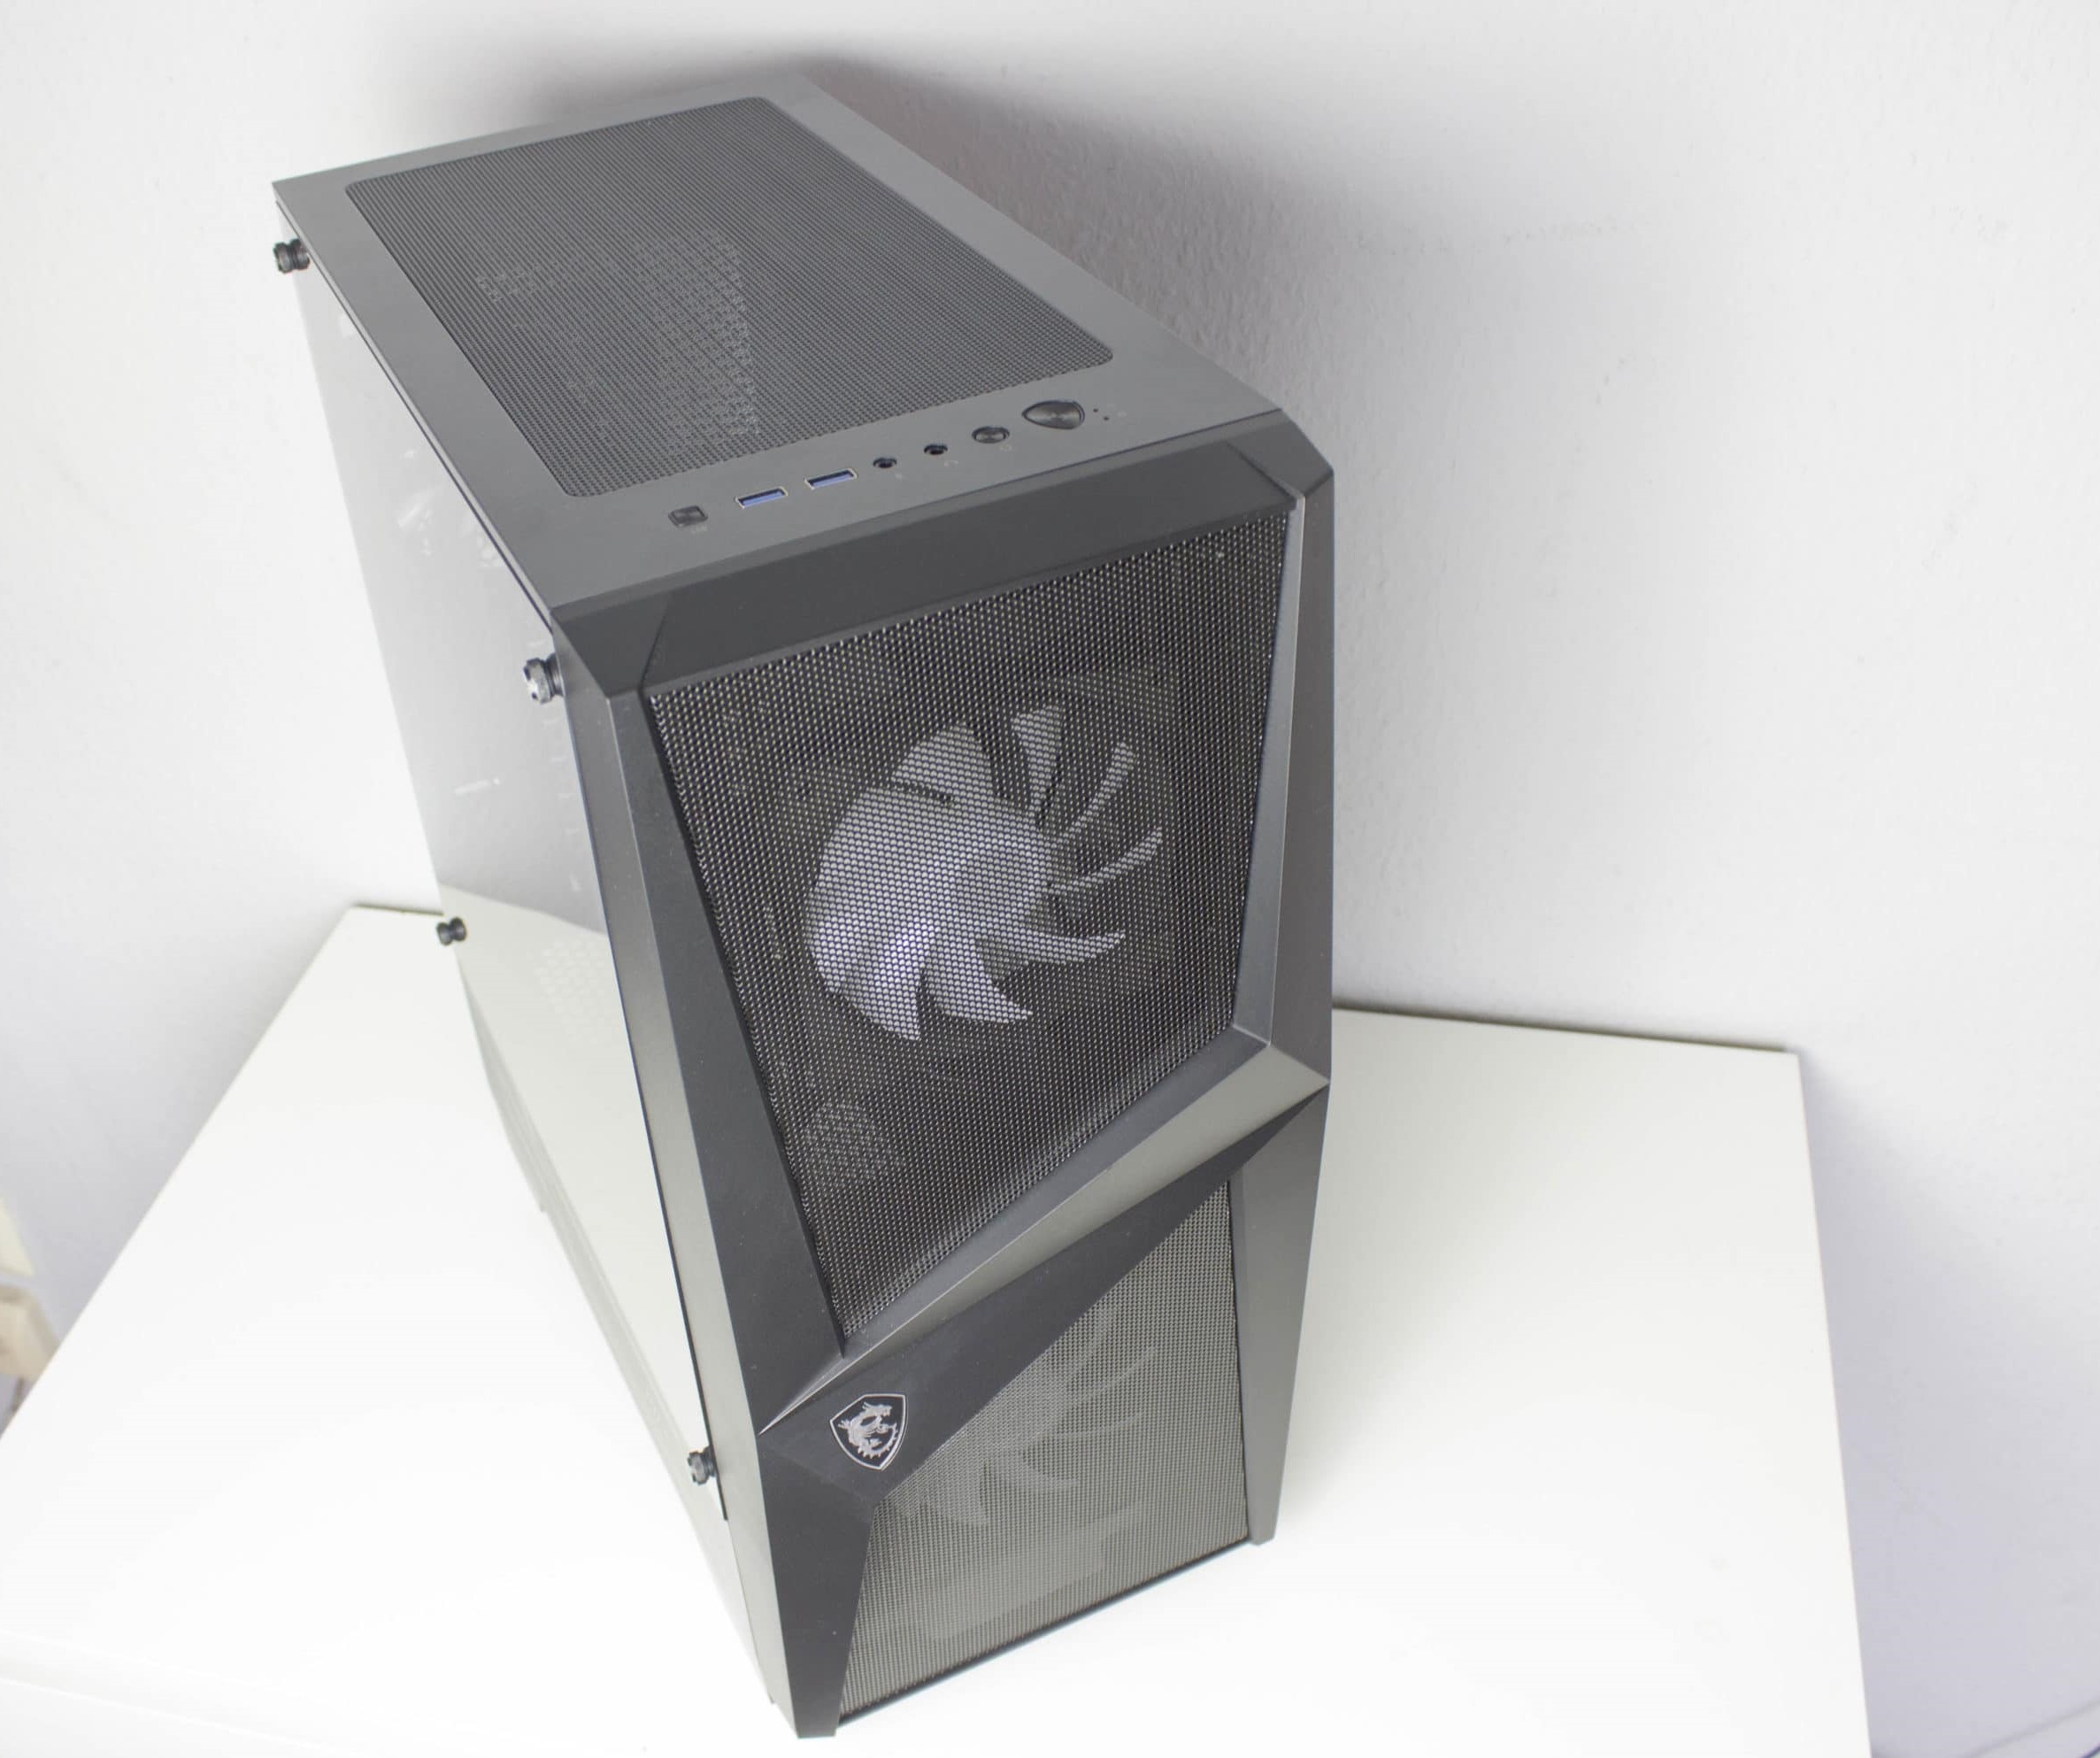 MSI MAG Forge 100R - low cost case with glass